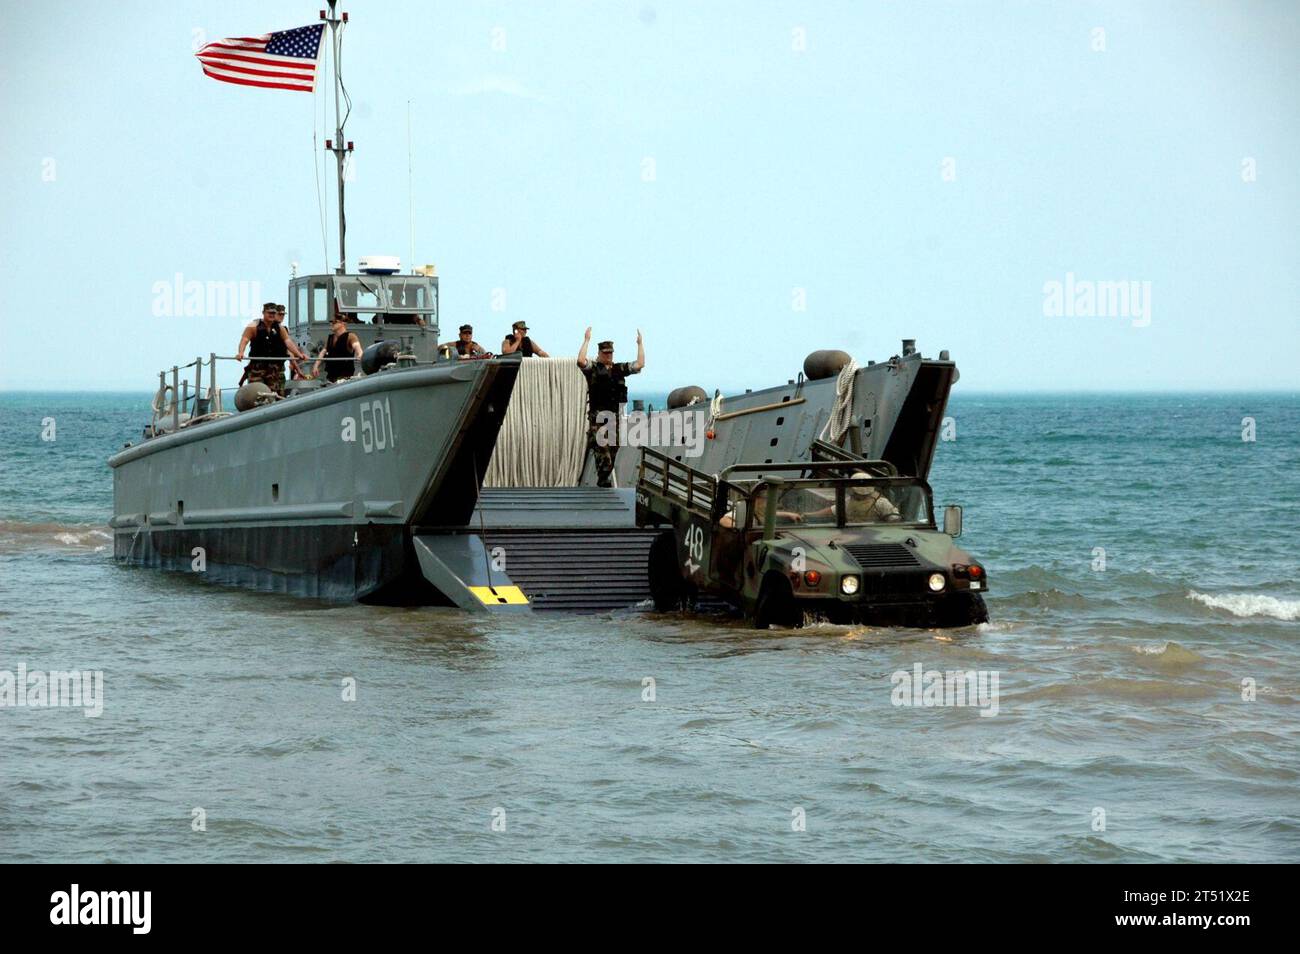 0806078848T-127 NAVAL STATION GREAT LAKES, Ill. (June 7, 2008) Landing Craft Mechanized 501 (LCM-501) and the ТSurfridersУ from Assault Craft Unit One (ACU-1), perform an on load of a Marine Corps vehicle assigned to Reserve Marine Air Control Group 48. ACU-1 and MCAG-48 demonstrated several beach landings and on and off loads for Reserve Sailors and family members attending a Family Fun Day hosted by the Navy Operational Support Center Great Lakes. U.S. Navy Stock Photo